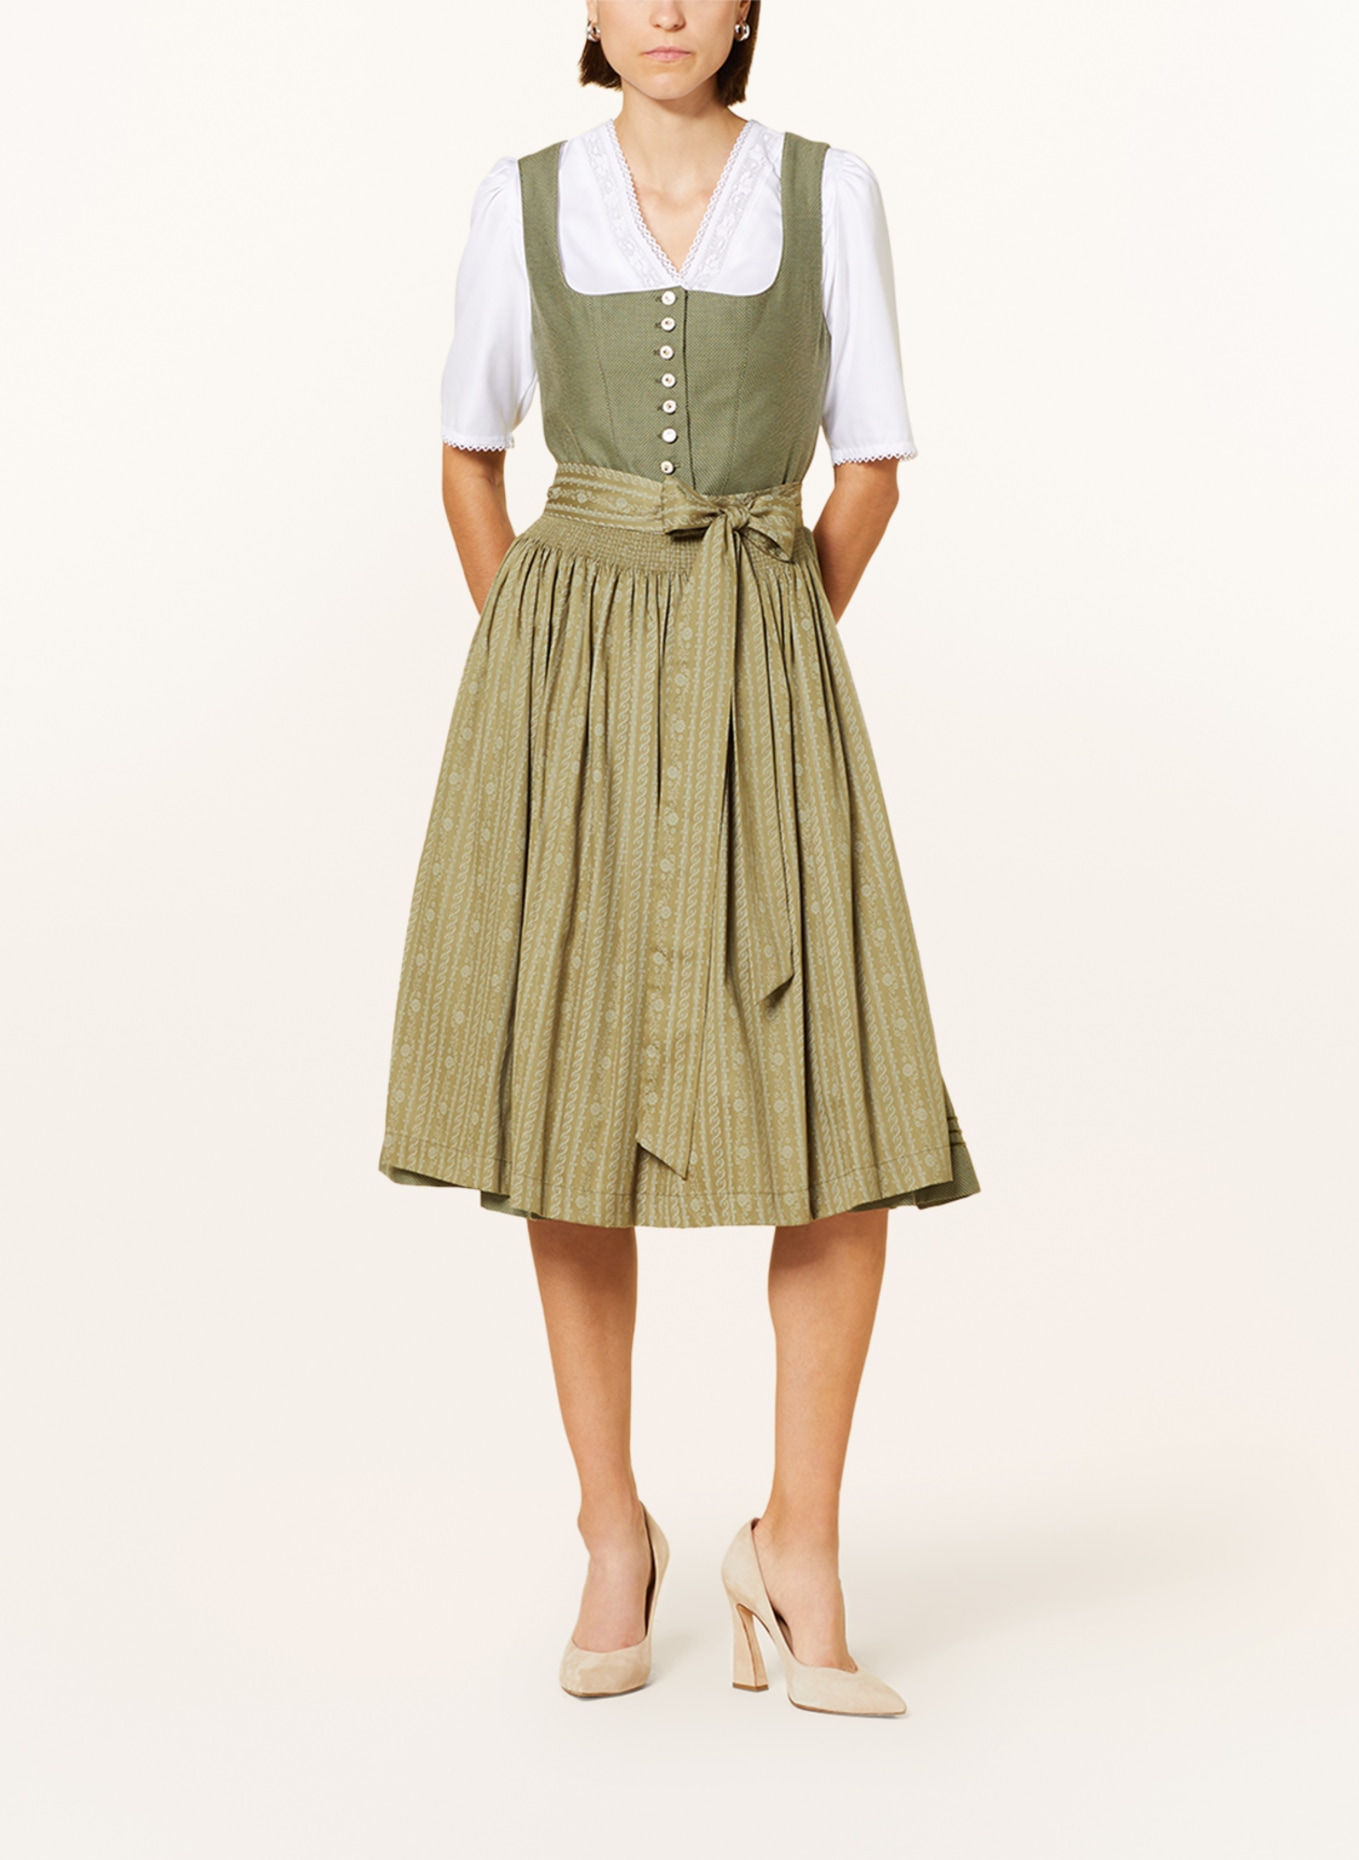 BERWIN & WOLFF Dirndl blouse with crochet lace, Color: WHITE (Image 4)